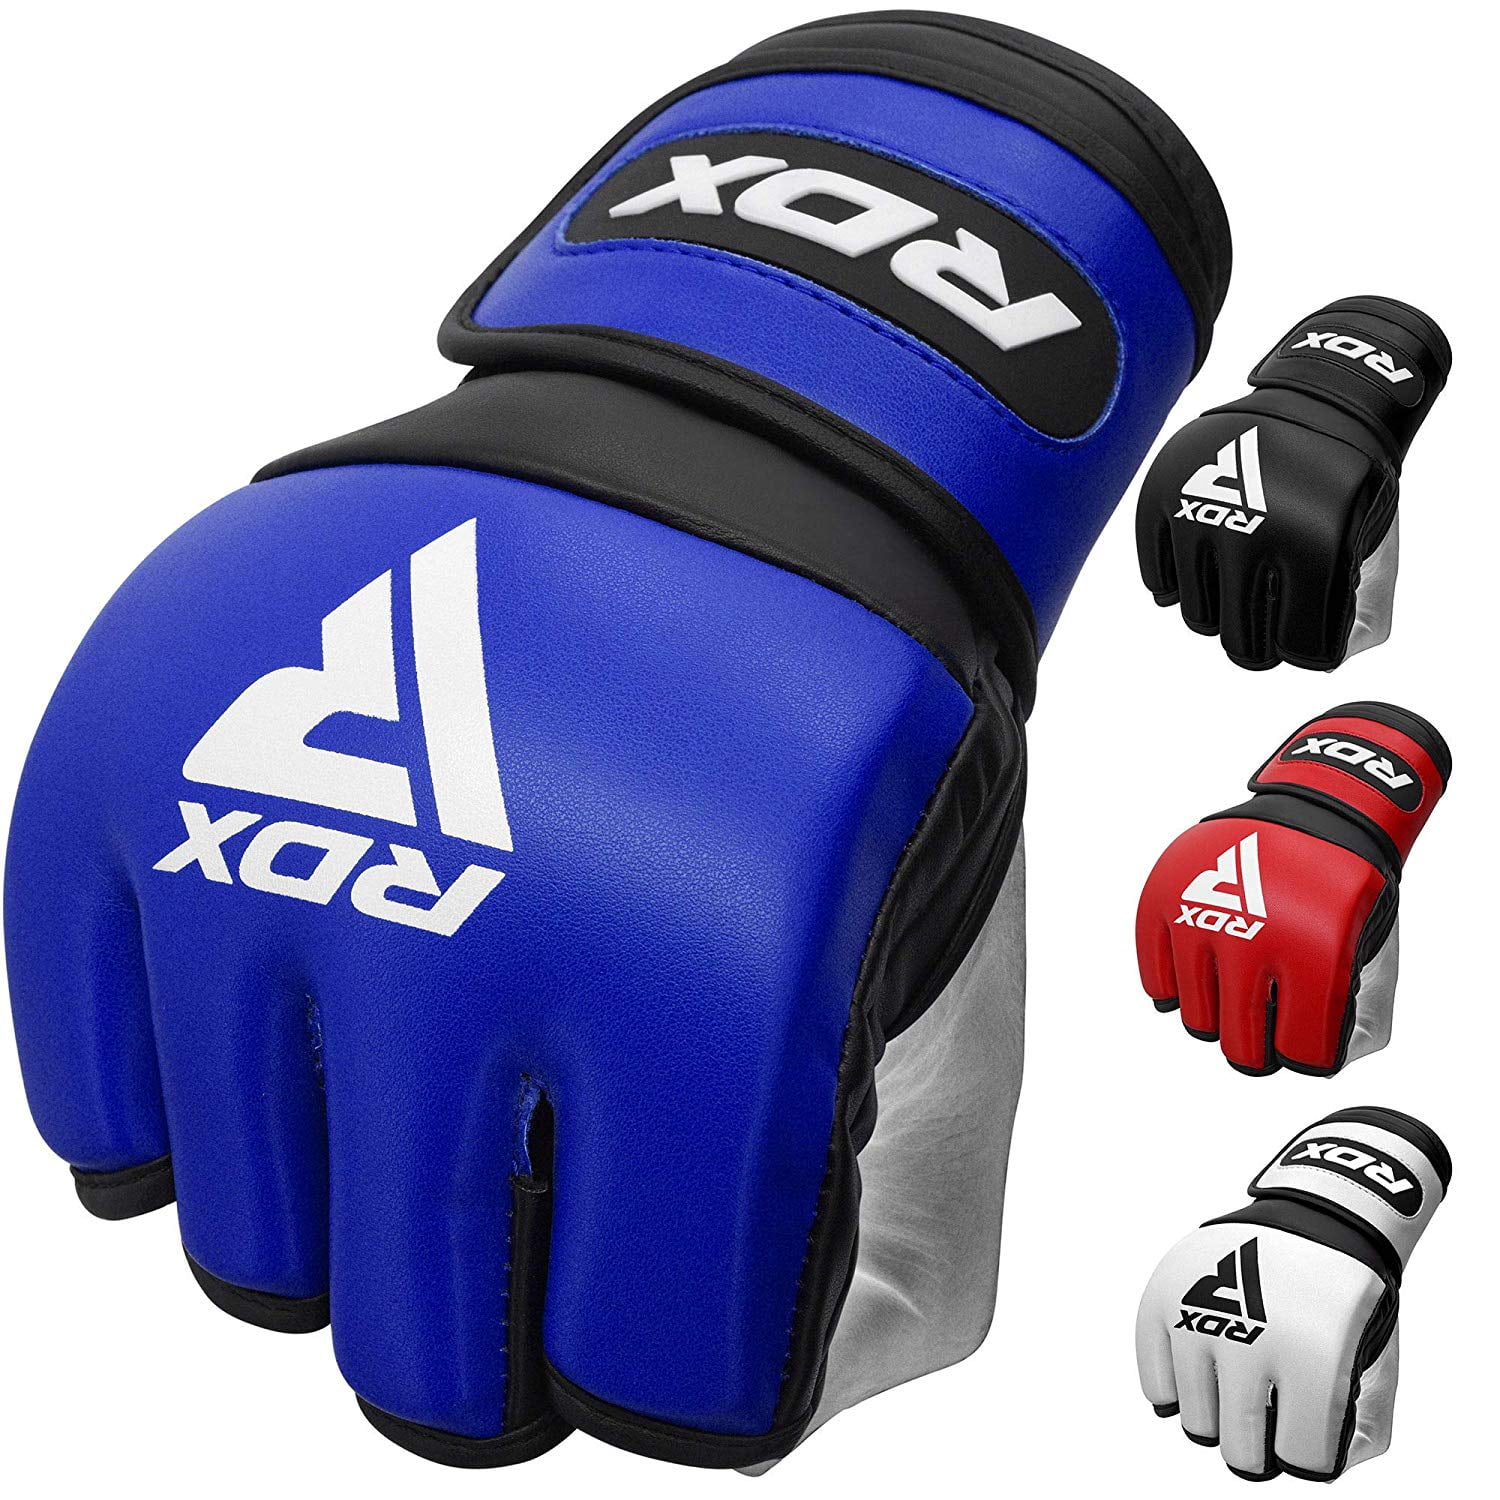 RDX MMA Gloves Punching Martial Arts Training Grappling Fight Muay Thai Sparring 